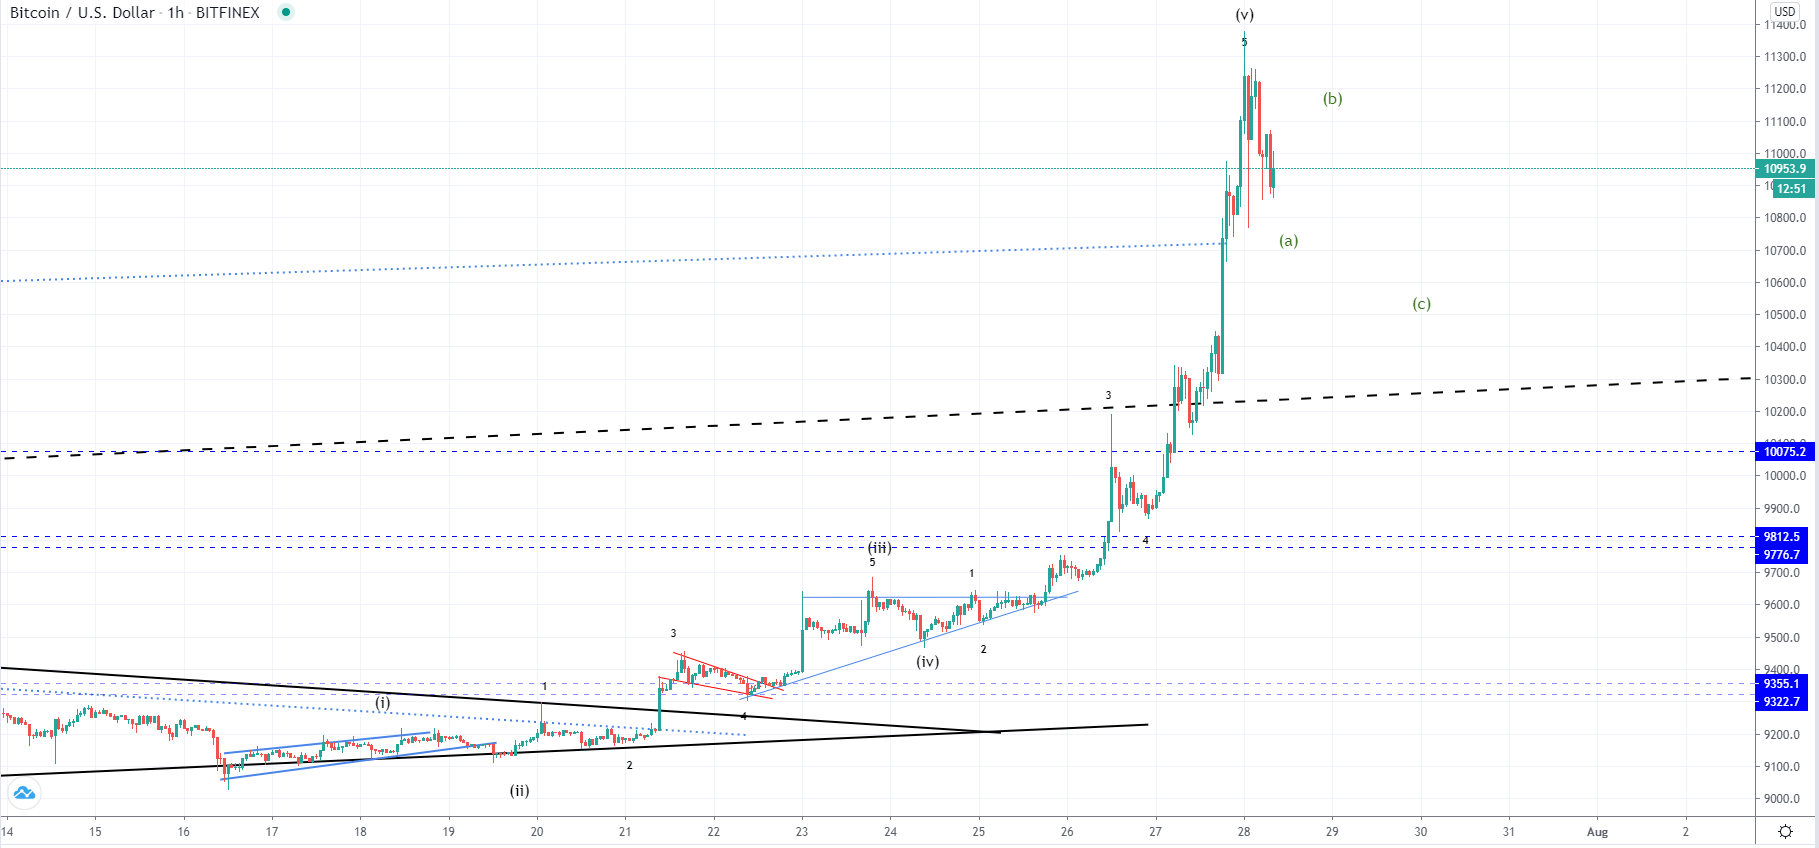 BTC and XRP - Impulsive increase likely ended